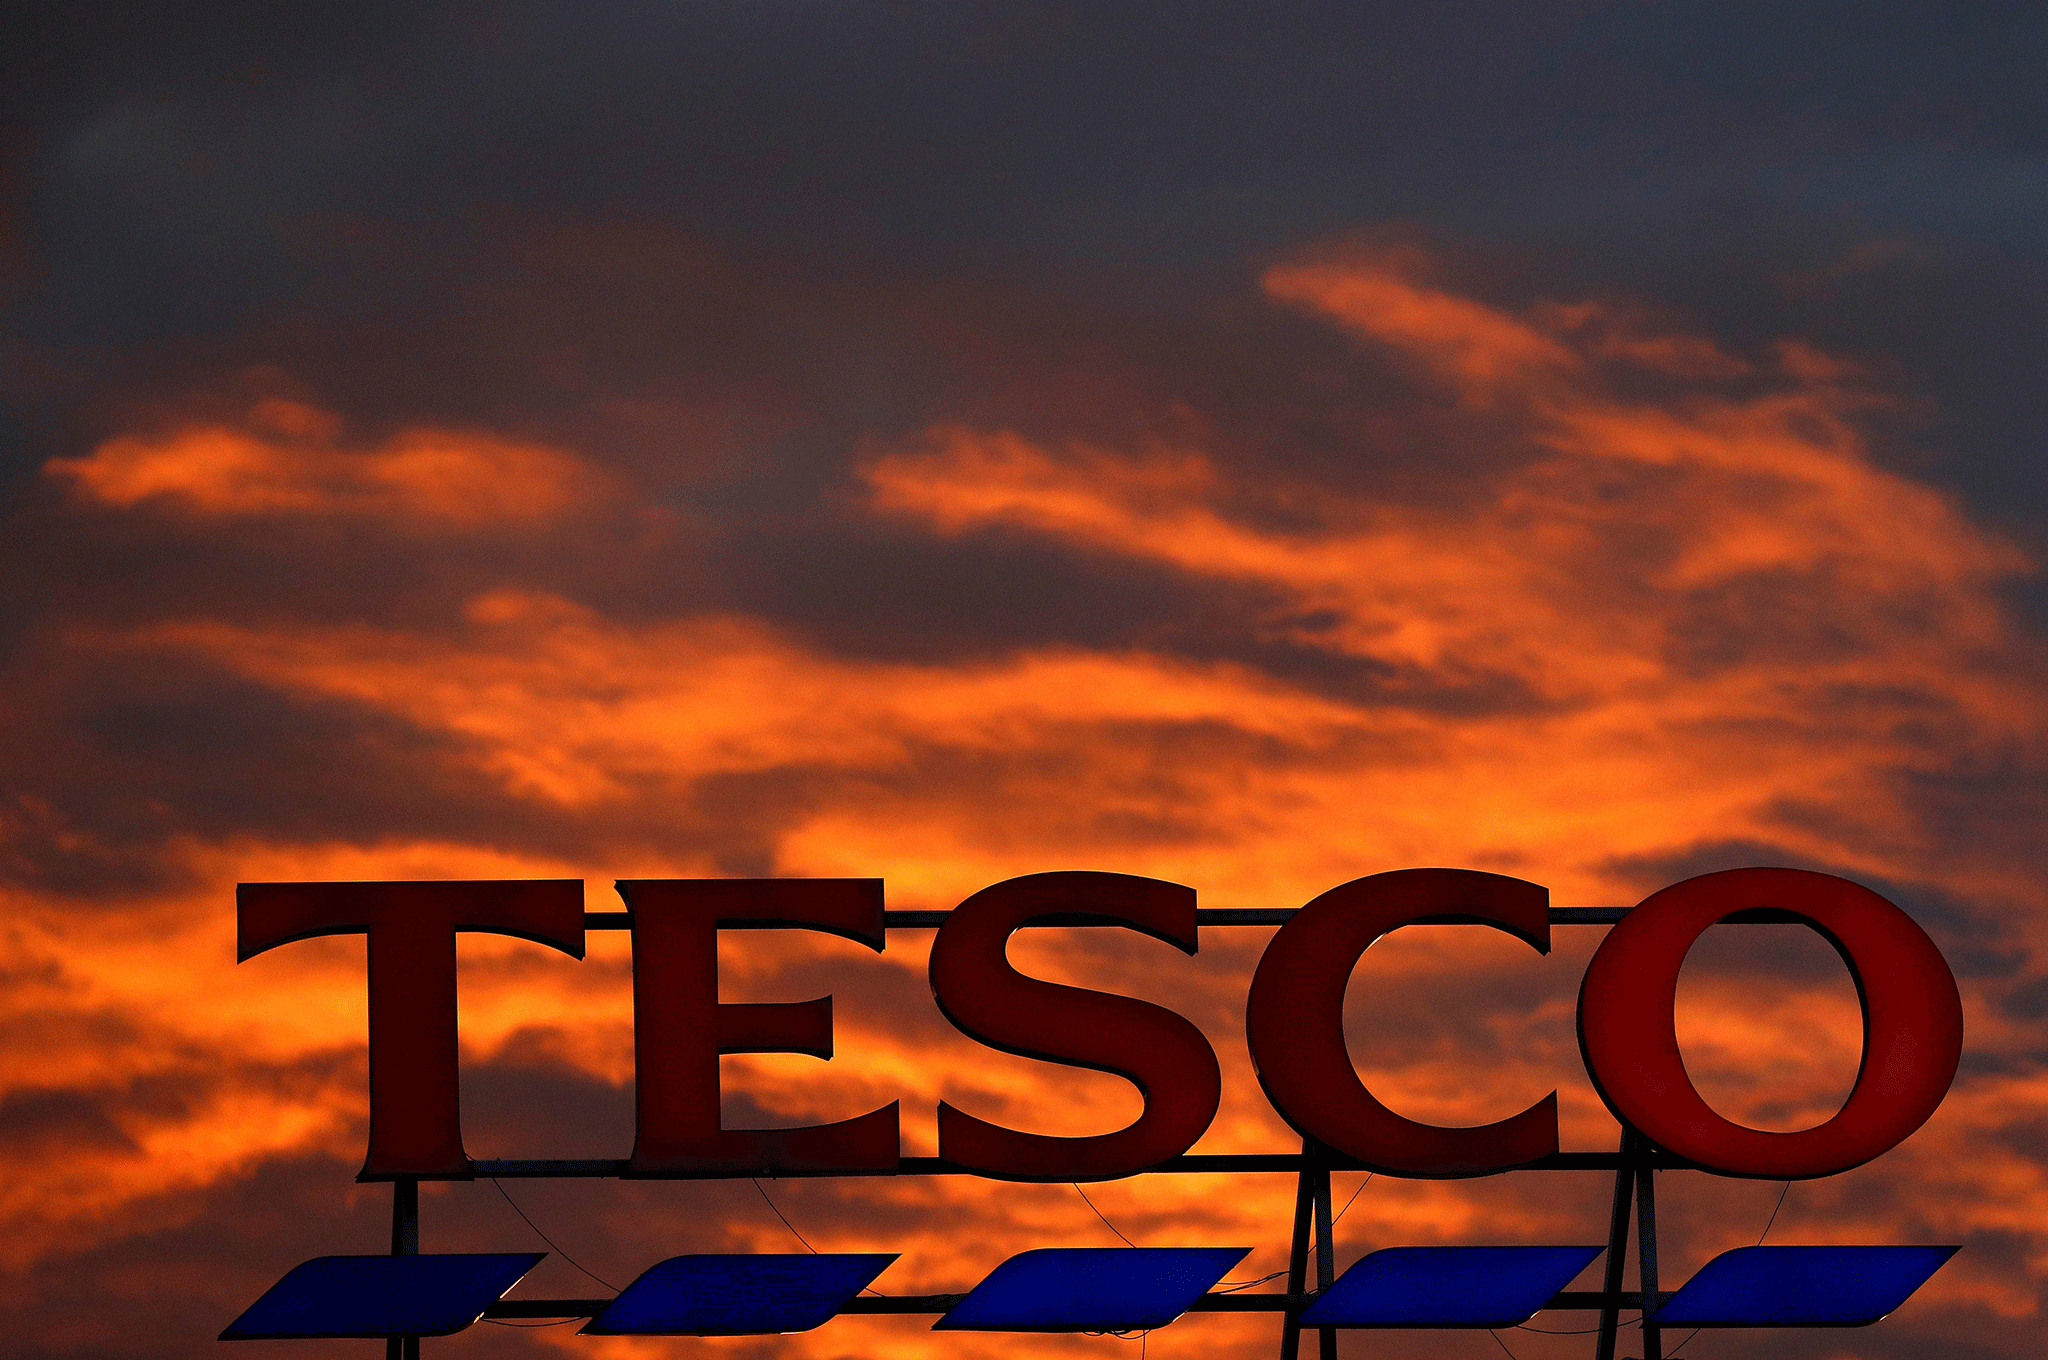 Read more

Tesco executives to face trial in 2017 after accounting scandal